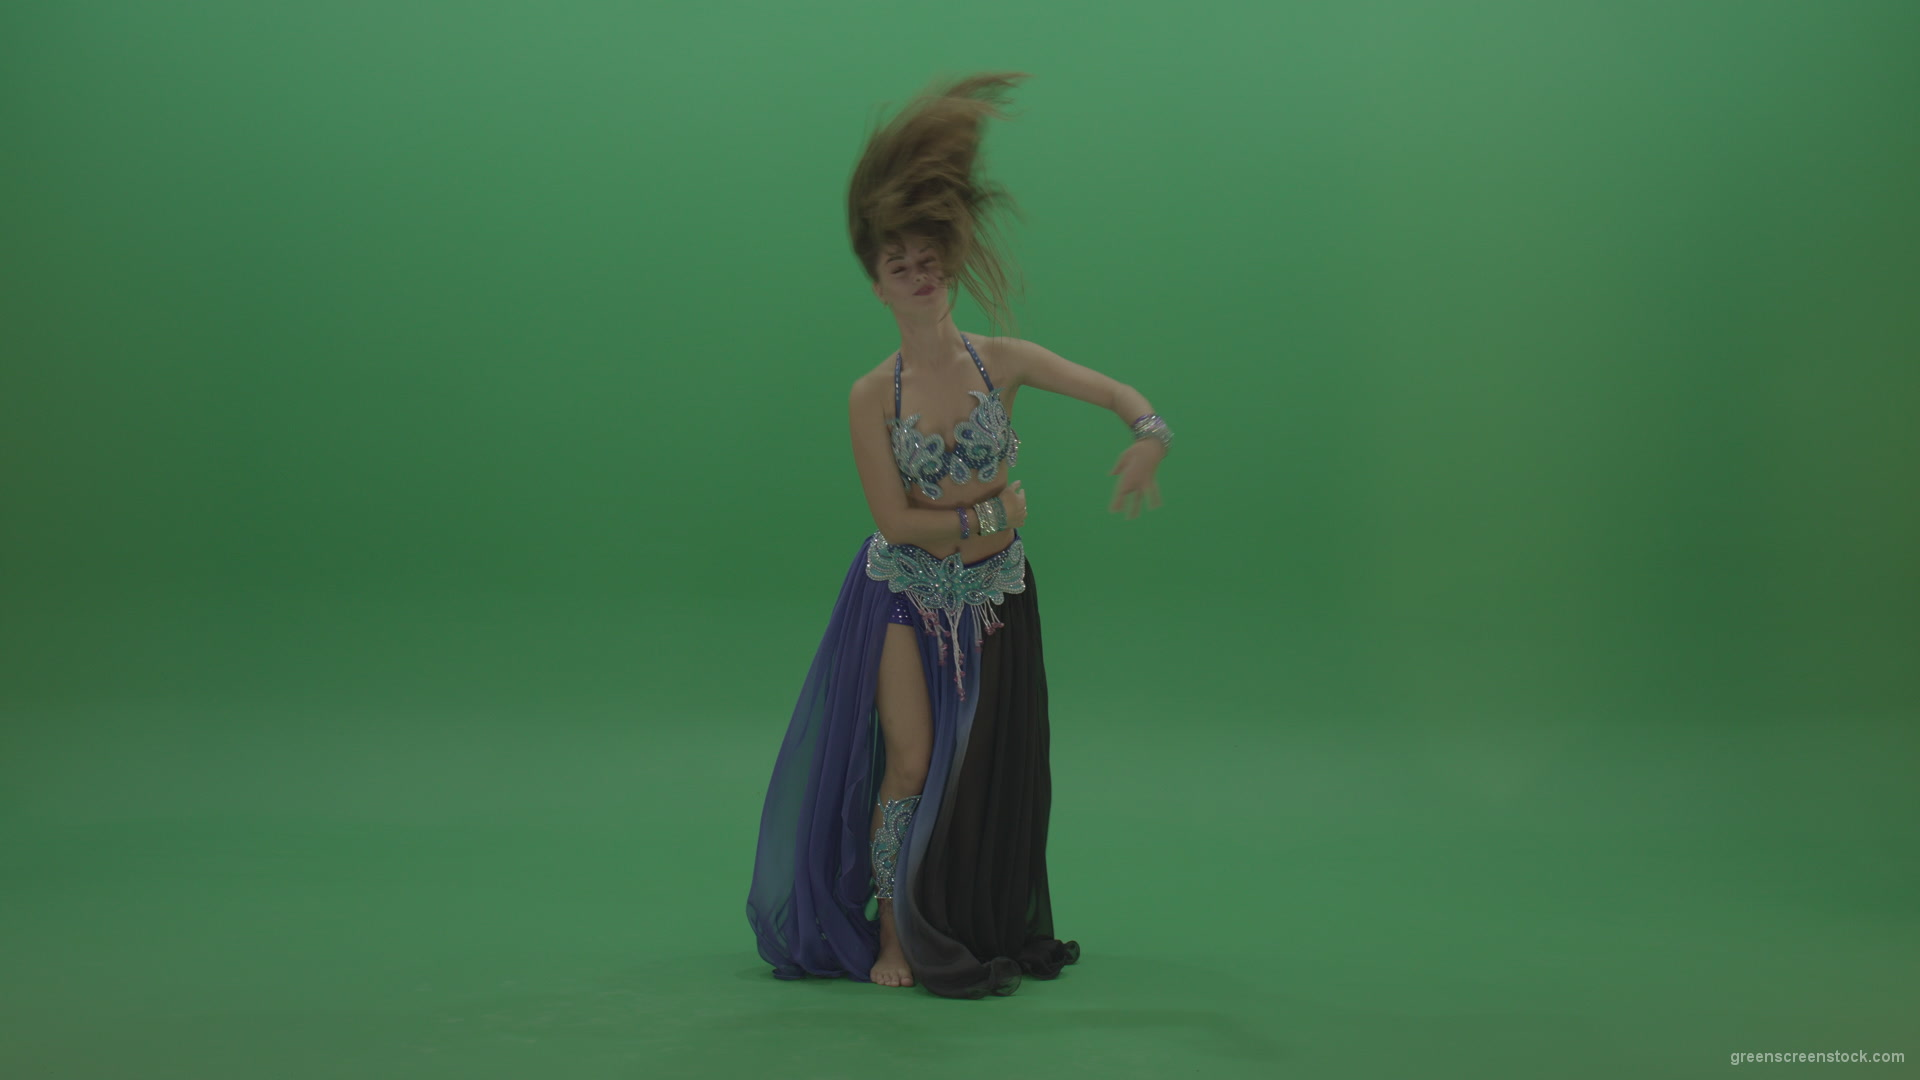 Foxy-belly-dancer-in-purple-and-black-wear-display-amazing-dance-moves-over-chromakey-background_005 Green Screen Stock